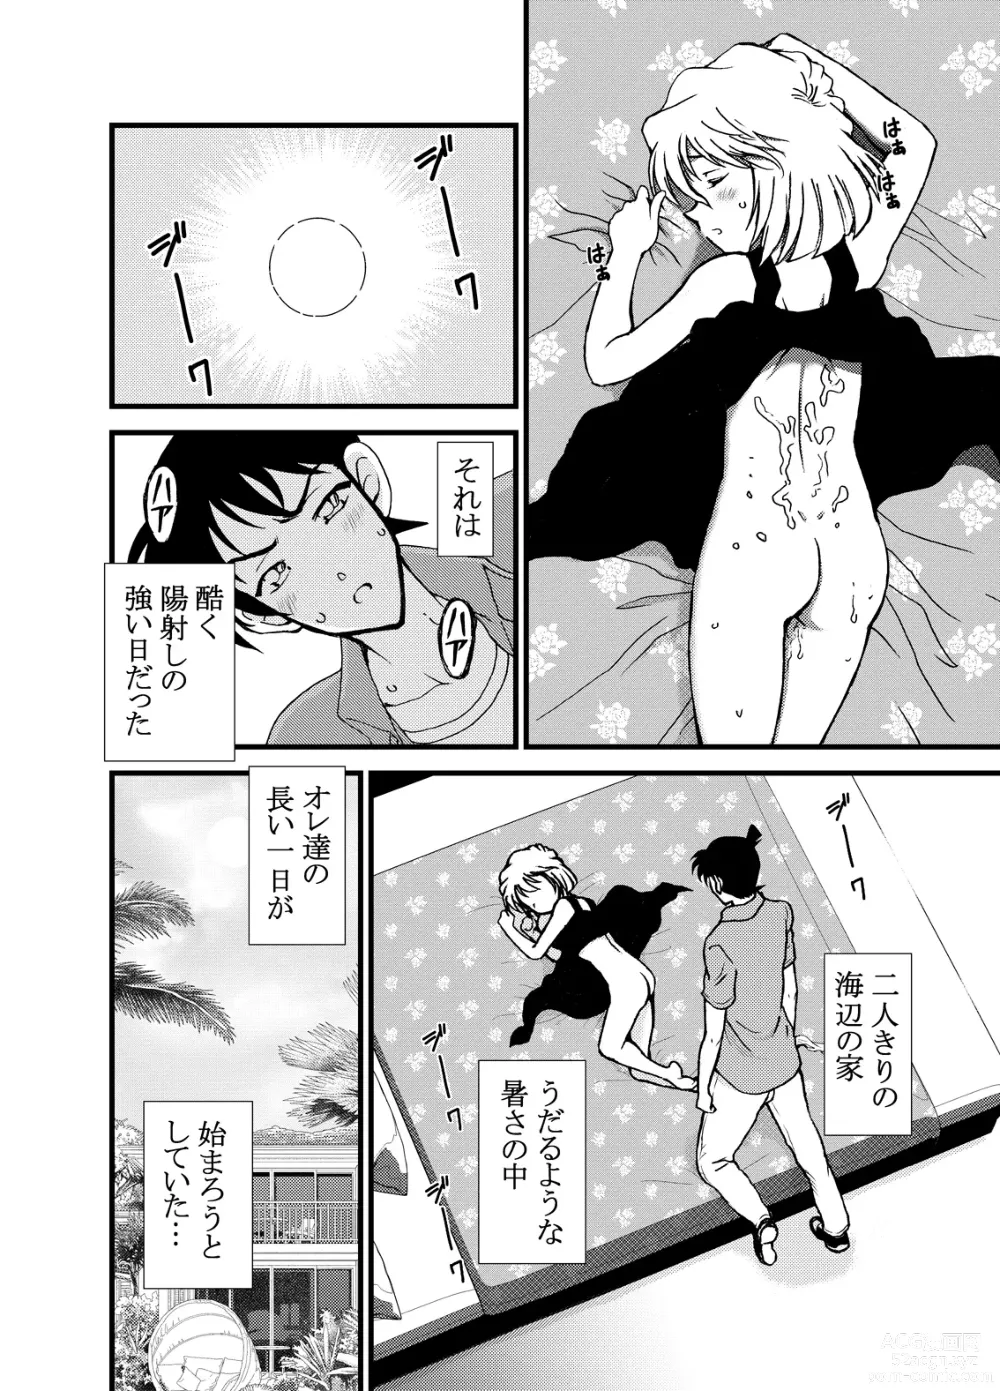 Page 17 of doujinshi Summer Resort Preview